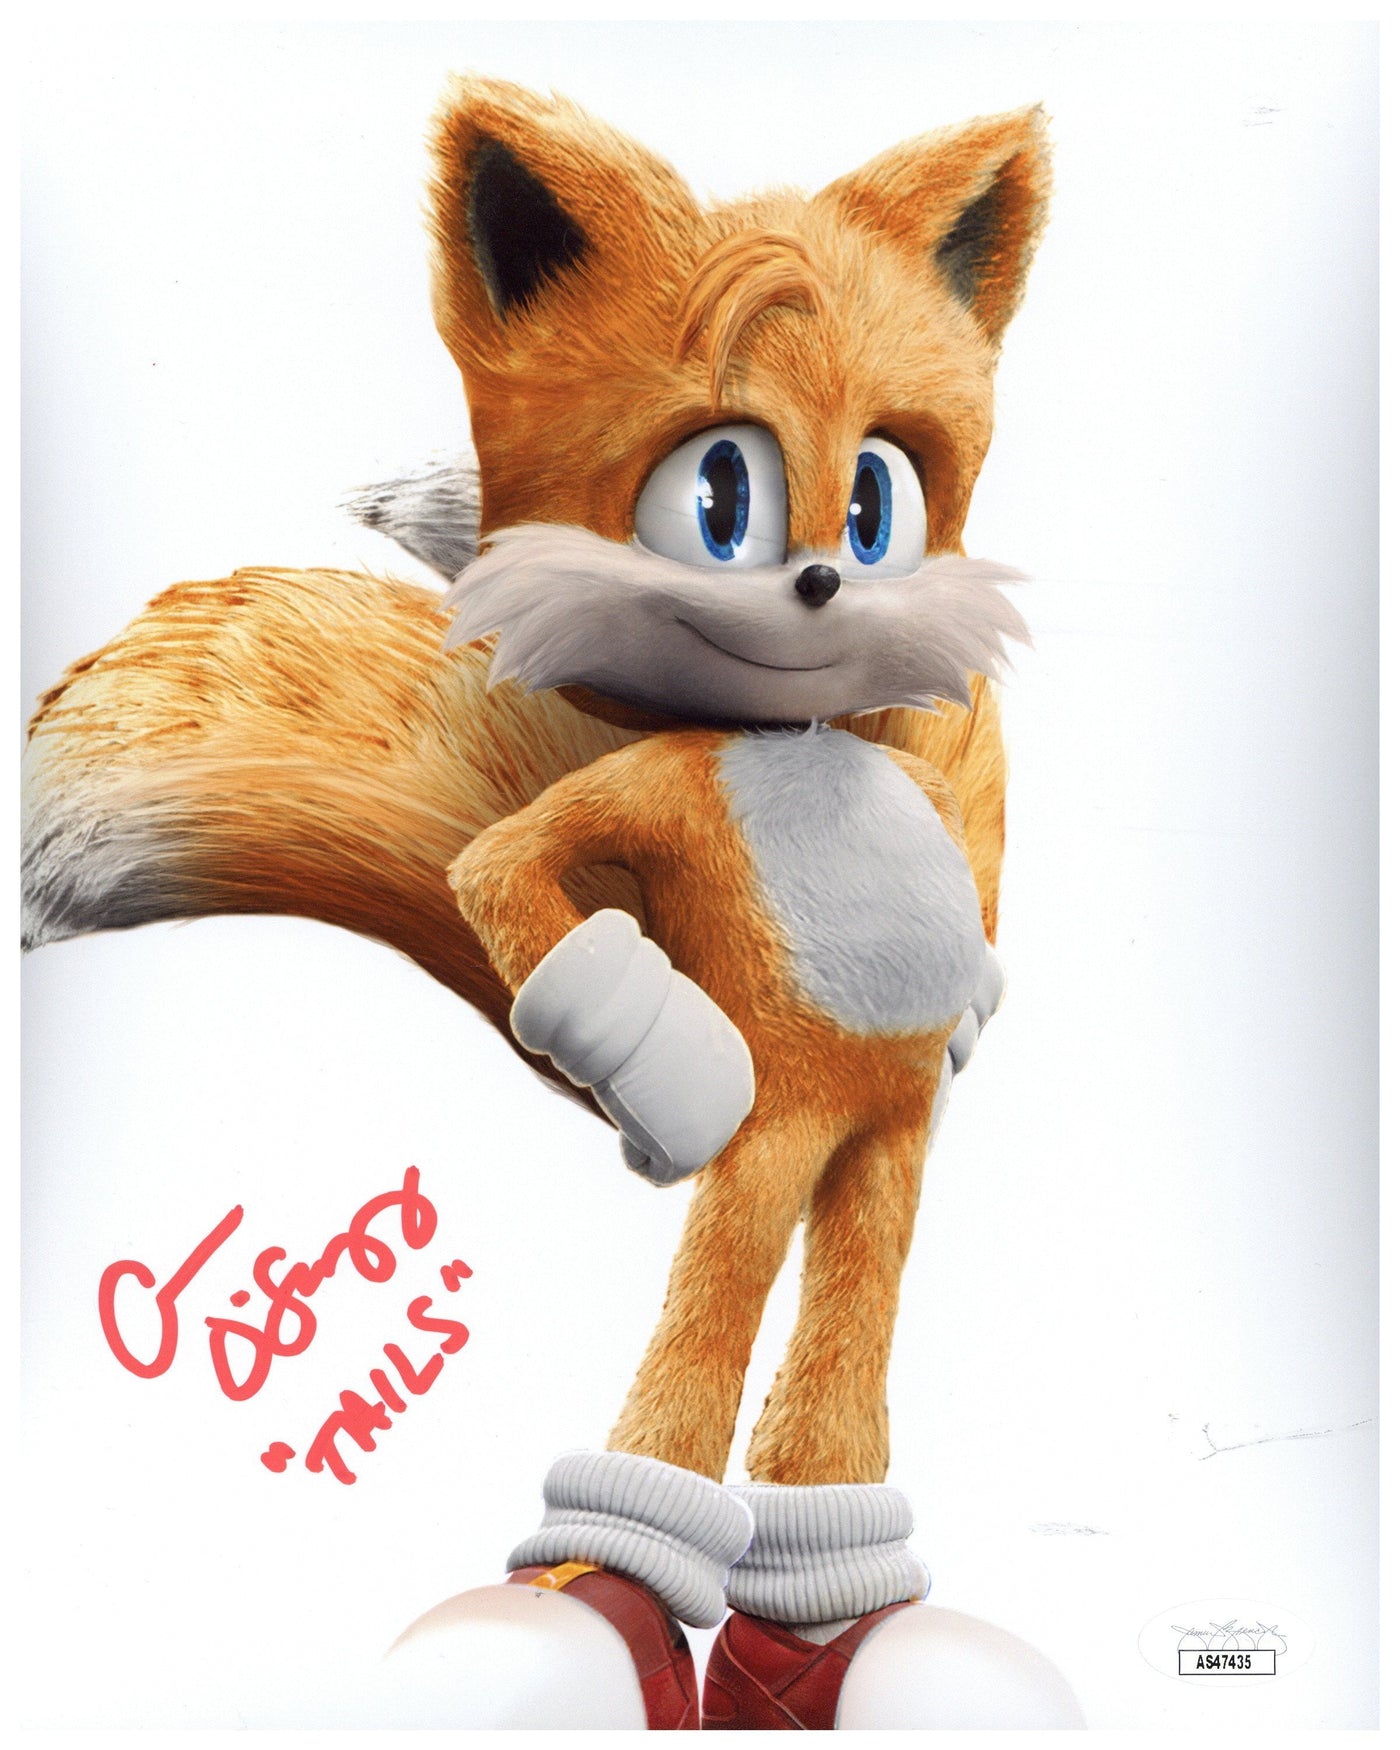 Colleen O'Shaughnessey Signed 8x10 Photo Sonic the Hedgehog Tail Autographed JSA